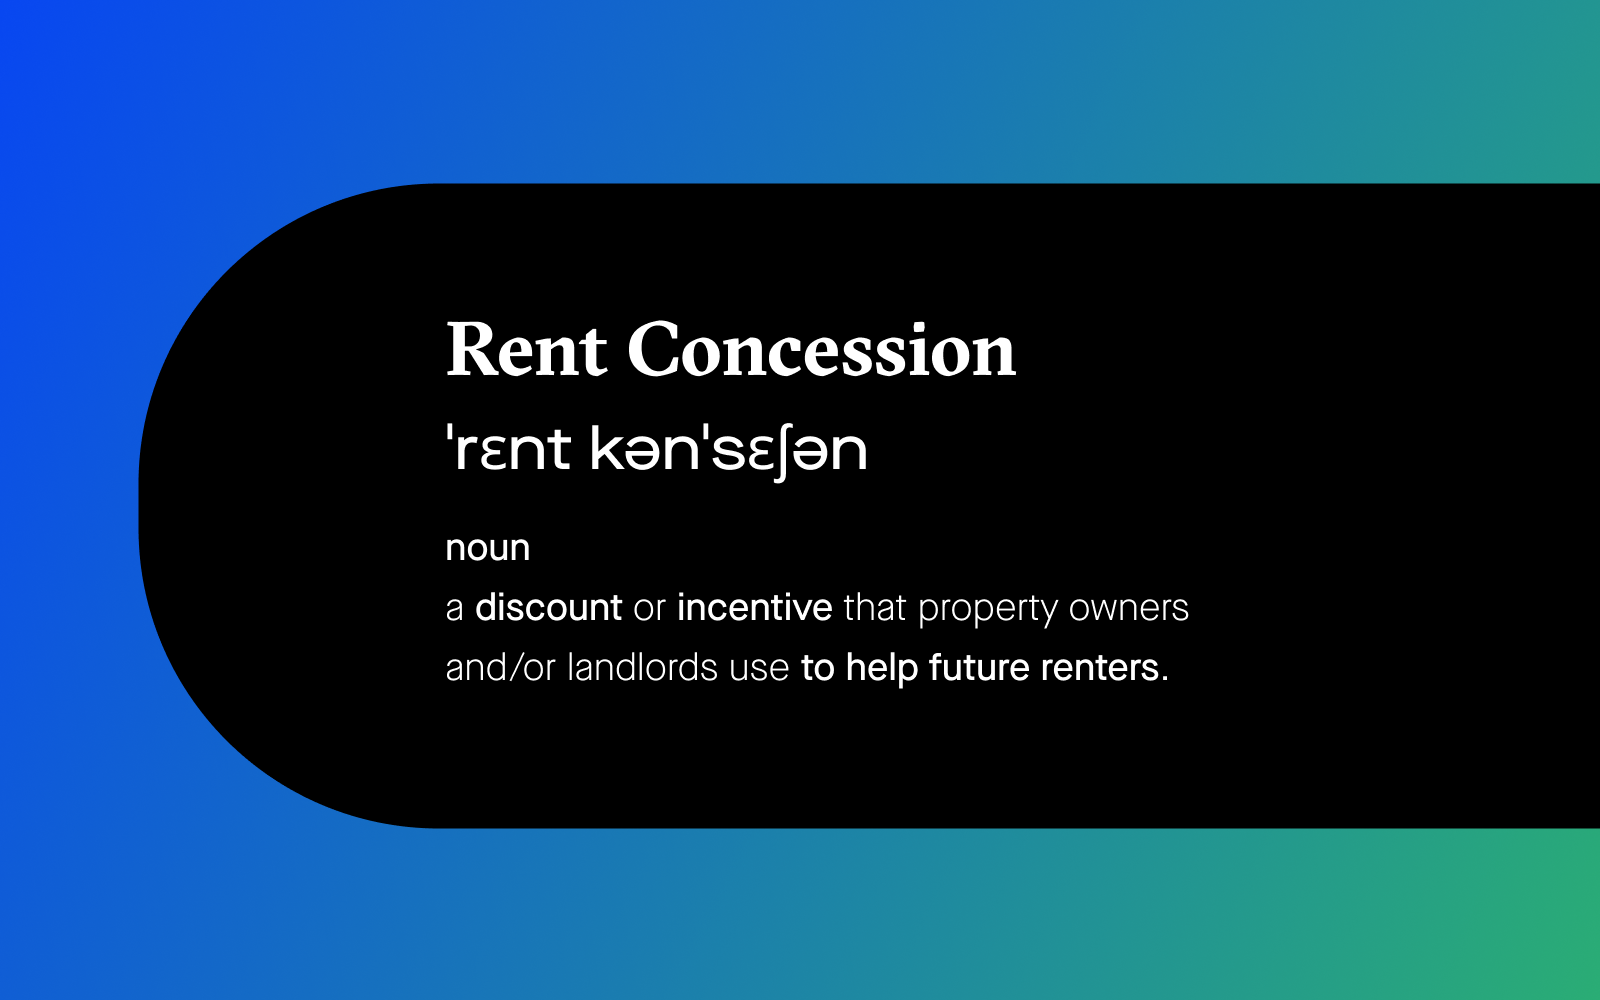 Graphic text of rent concession definition, "rent concession, noun, a discount or incentive that property owners and/or landlords use to help future renters."